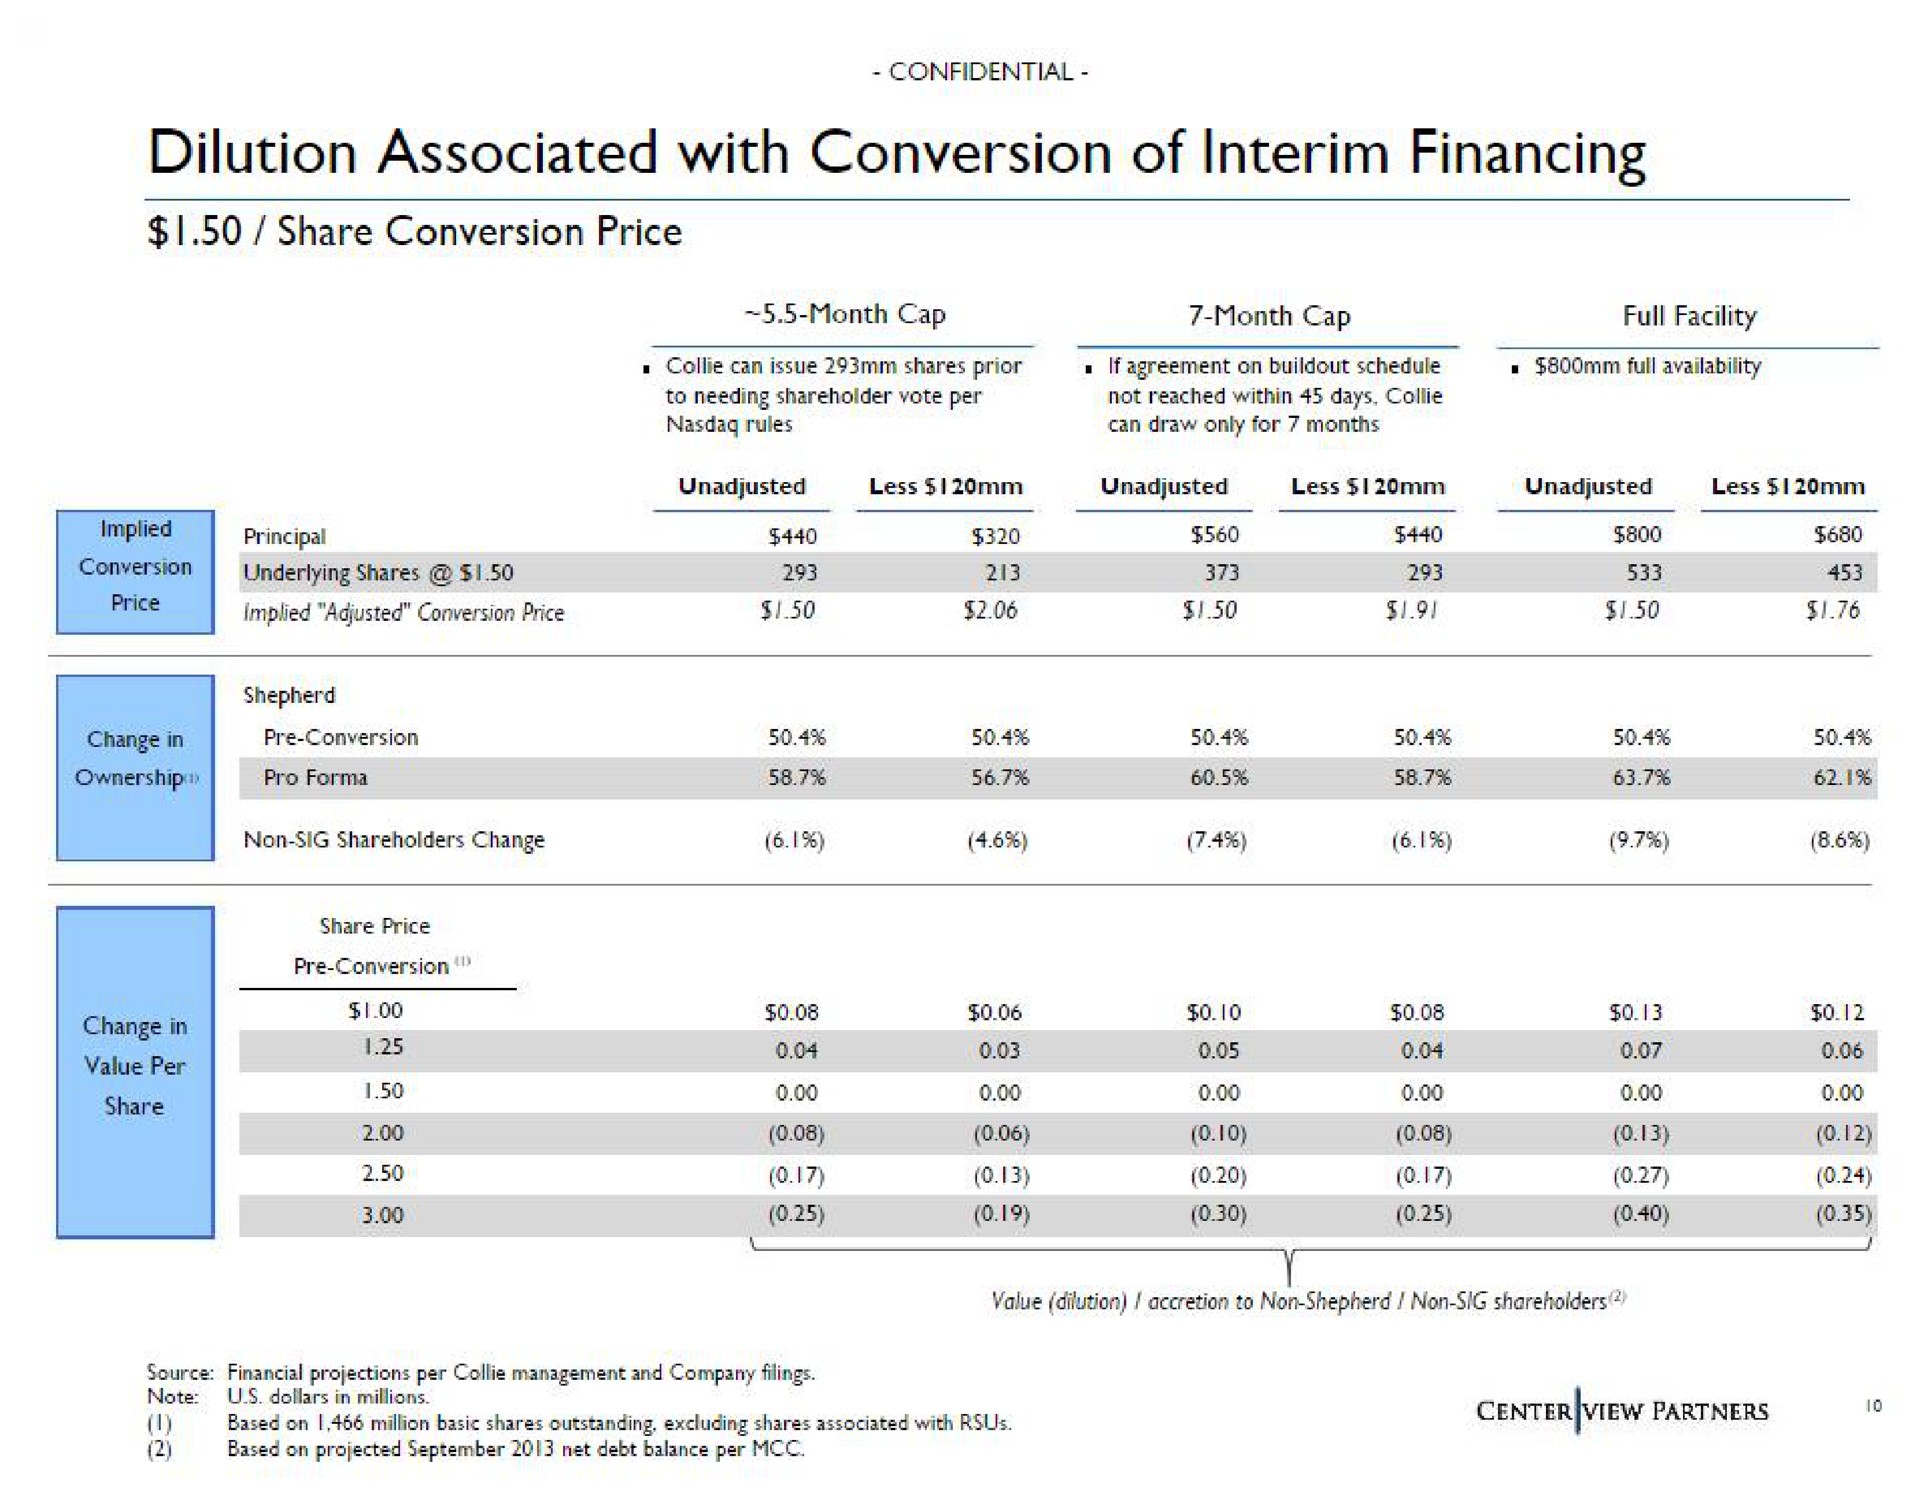 dilution associated with conversion of interim financing | Centerview Partners